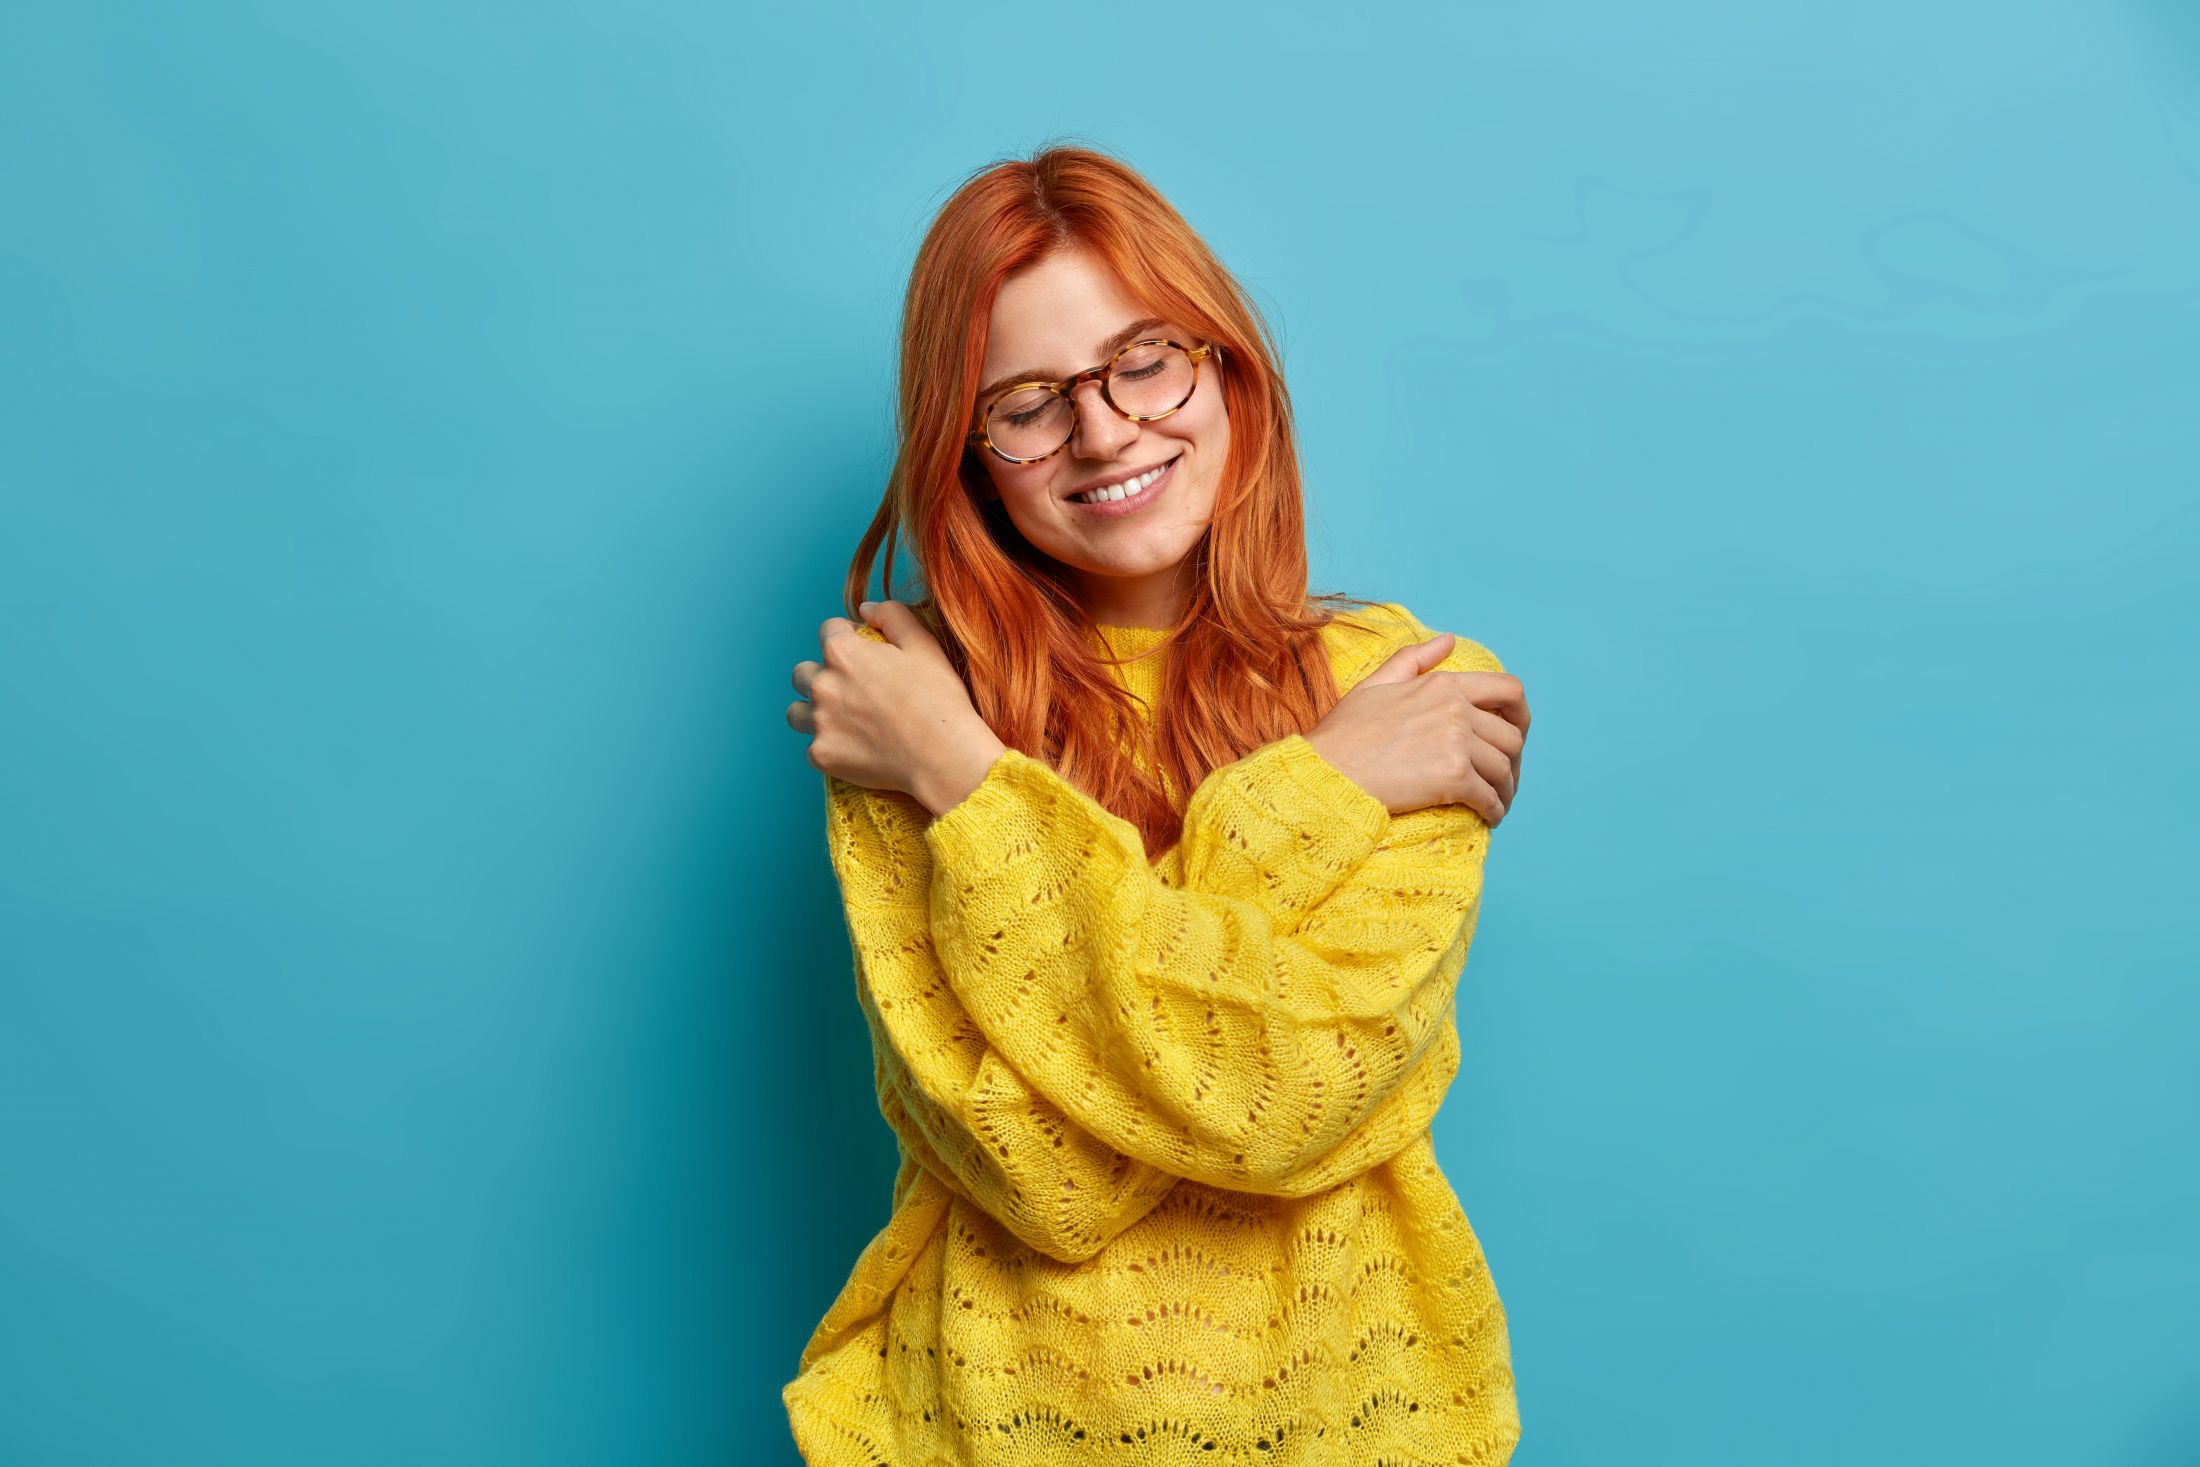 romantic-beautiful-redhead-woman-embraces-herself-expresses-self-love-and-care-tilts-head-smiles-gently-closes-eyes-hugs-own-body-wears-warm-yellow-sweater-expresses-calmness.jpg